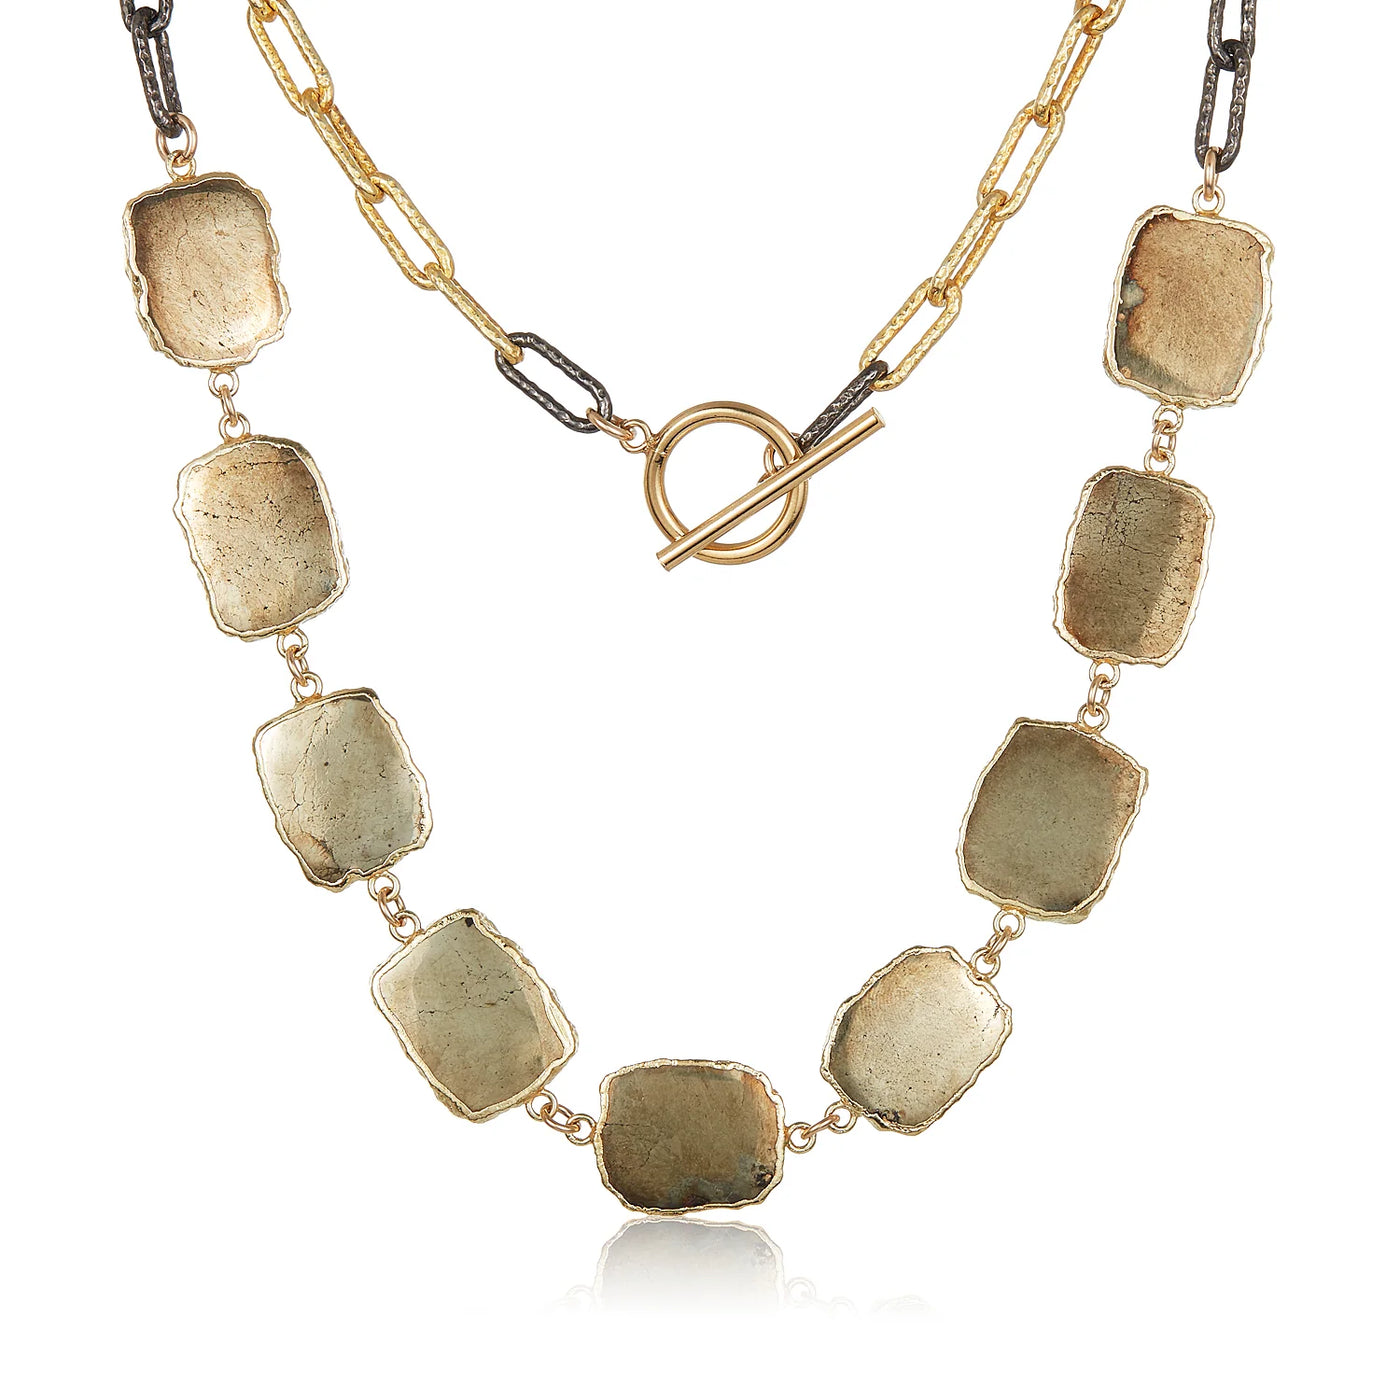 MABEL CHONG NECKLACE LINKS OF PYRITE